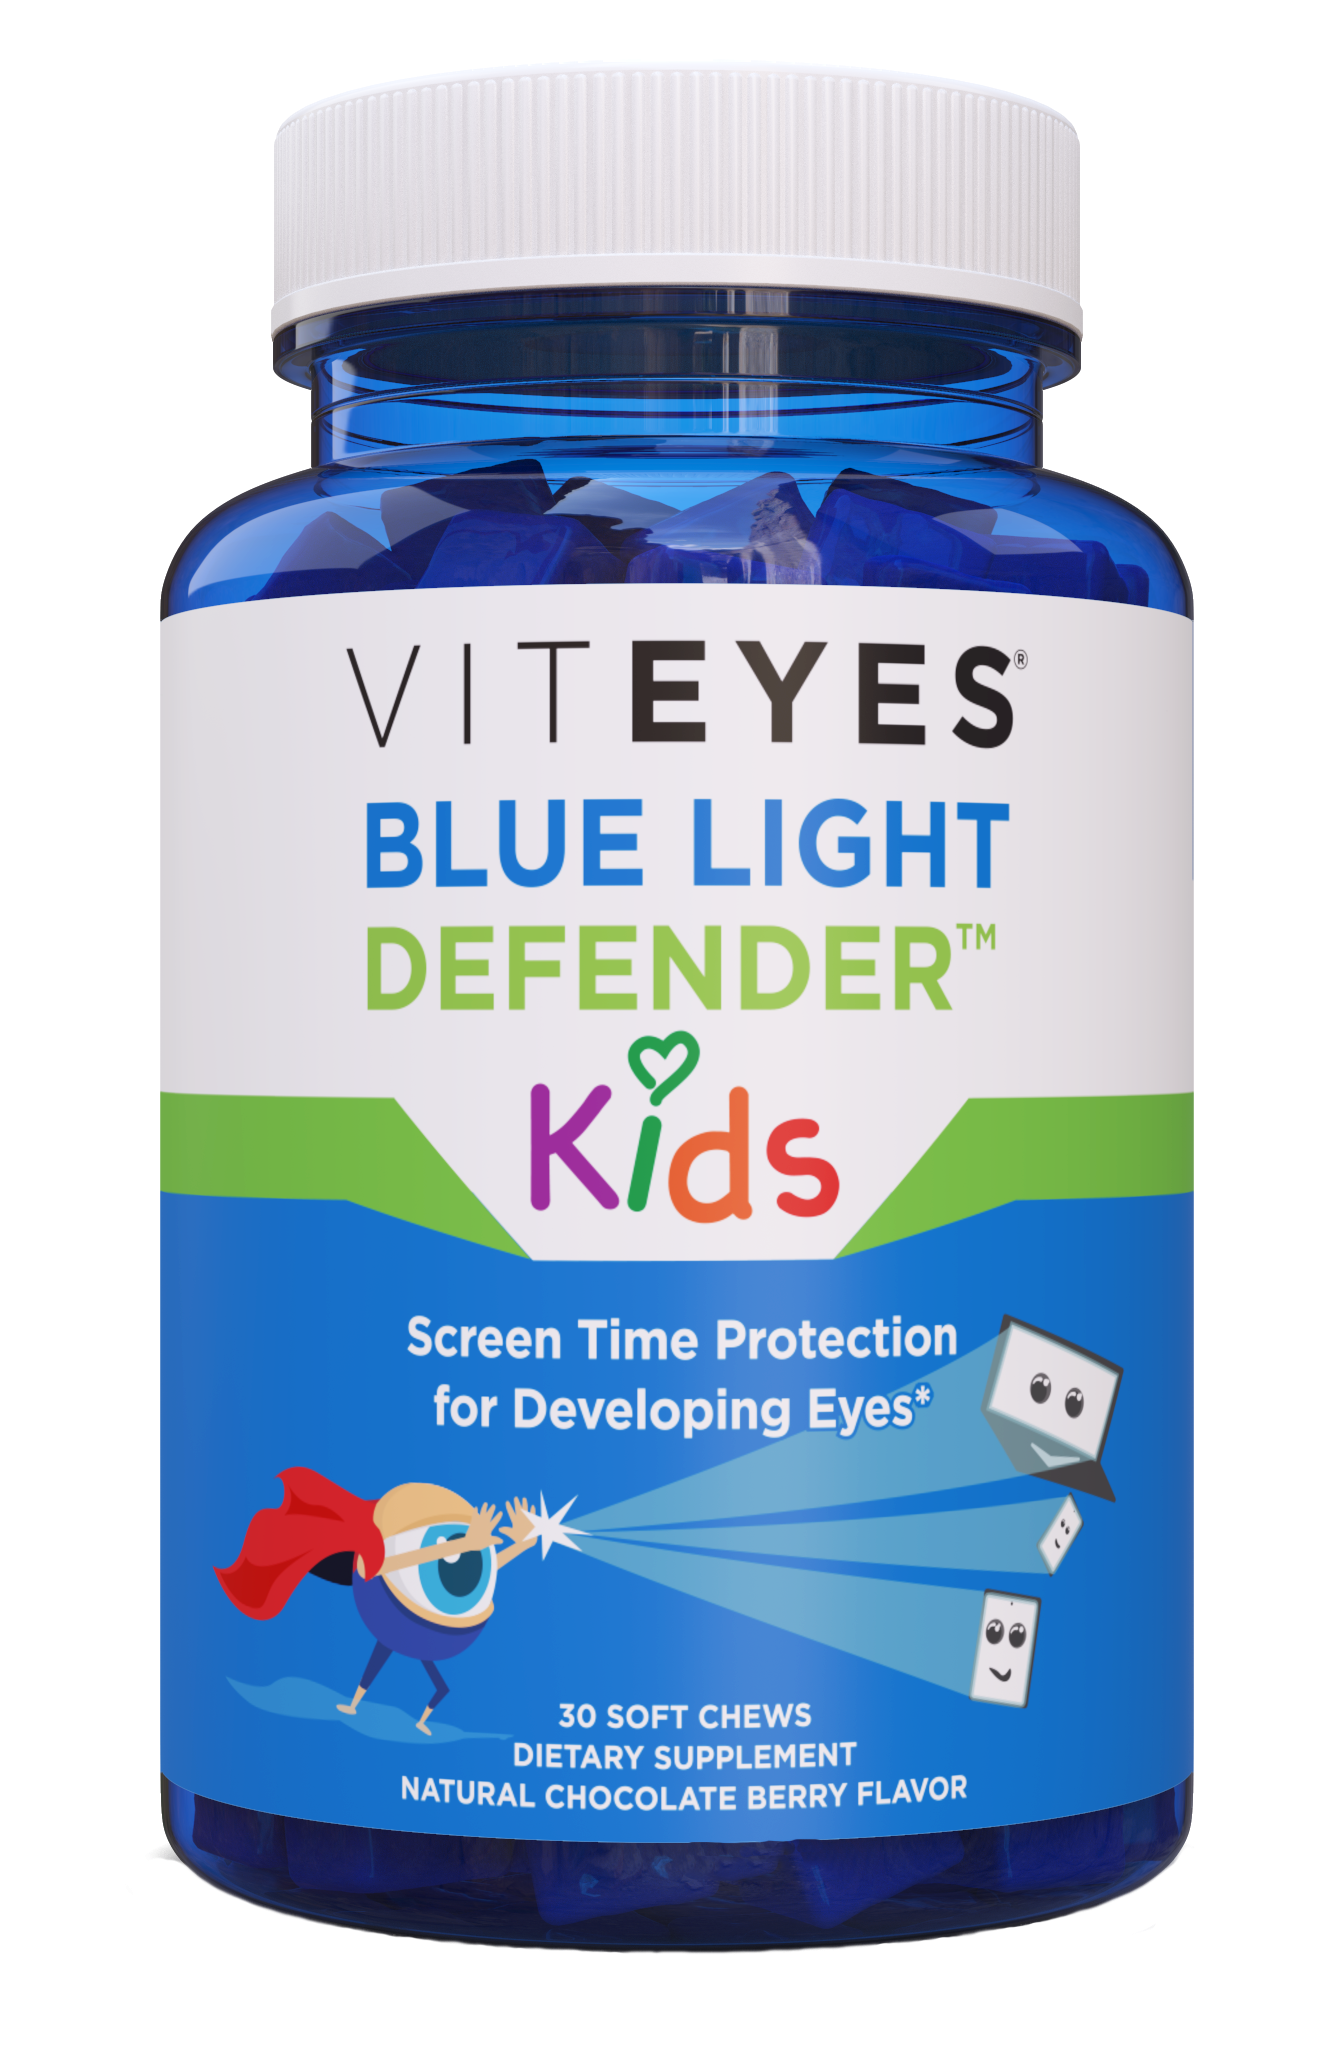 As distance learning becomes the new reality, the market for children’s eye health products is growing.